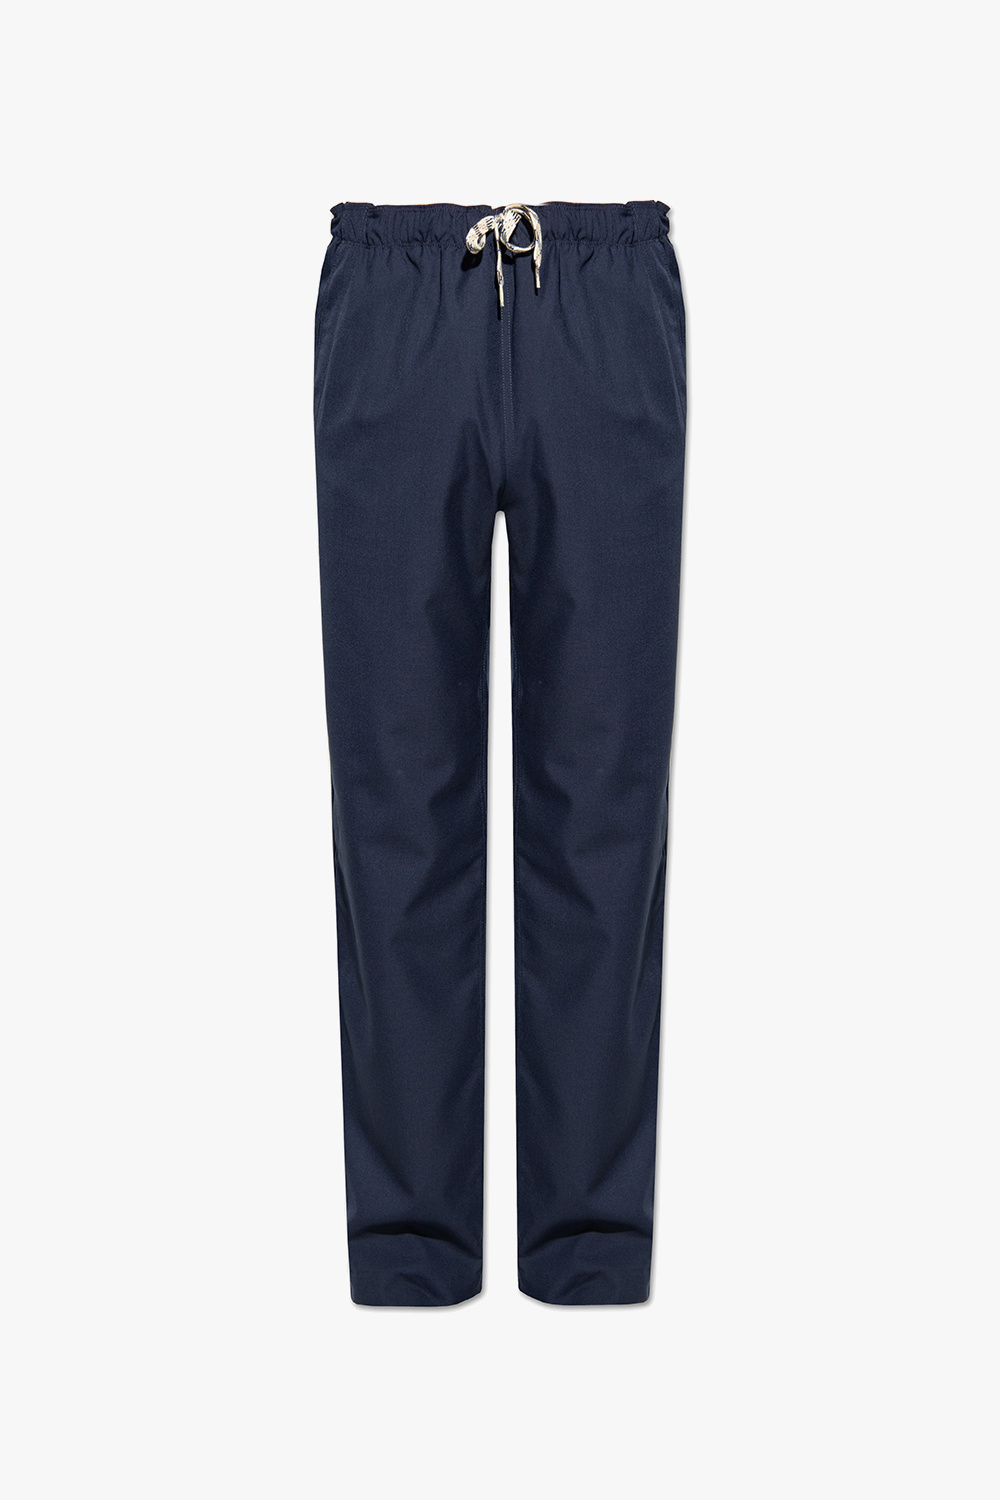 Zadig & Voltaire ‘Pixel’ relaxed-fitting trousers